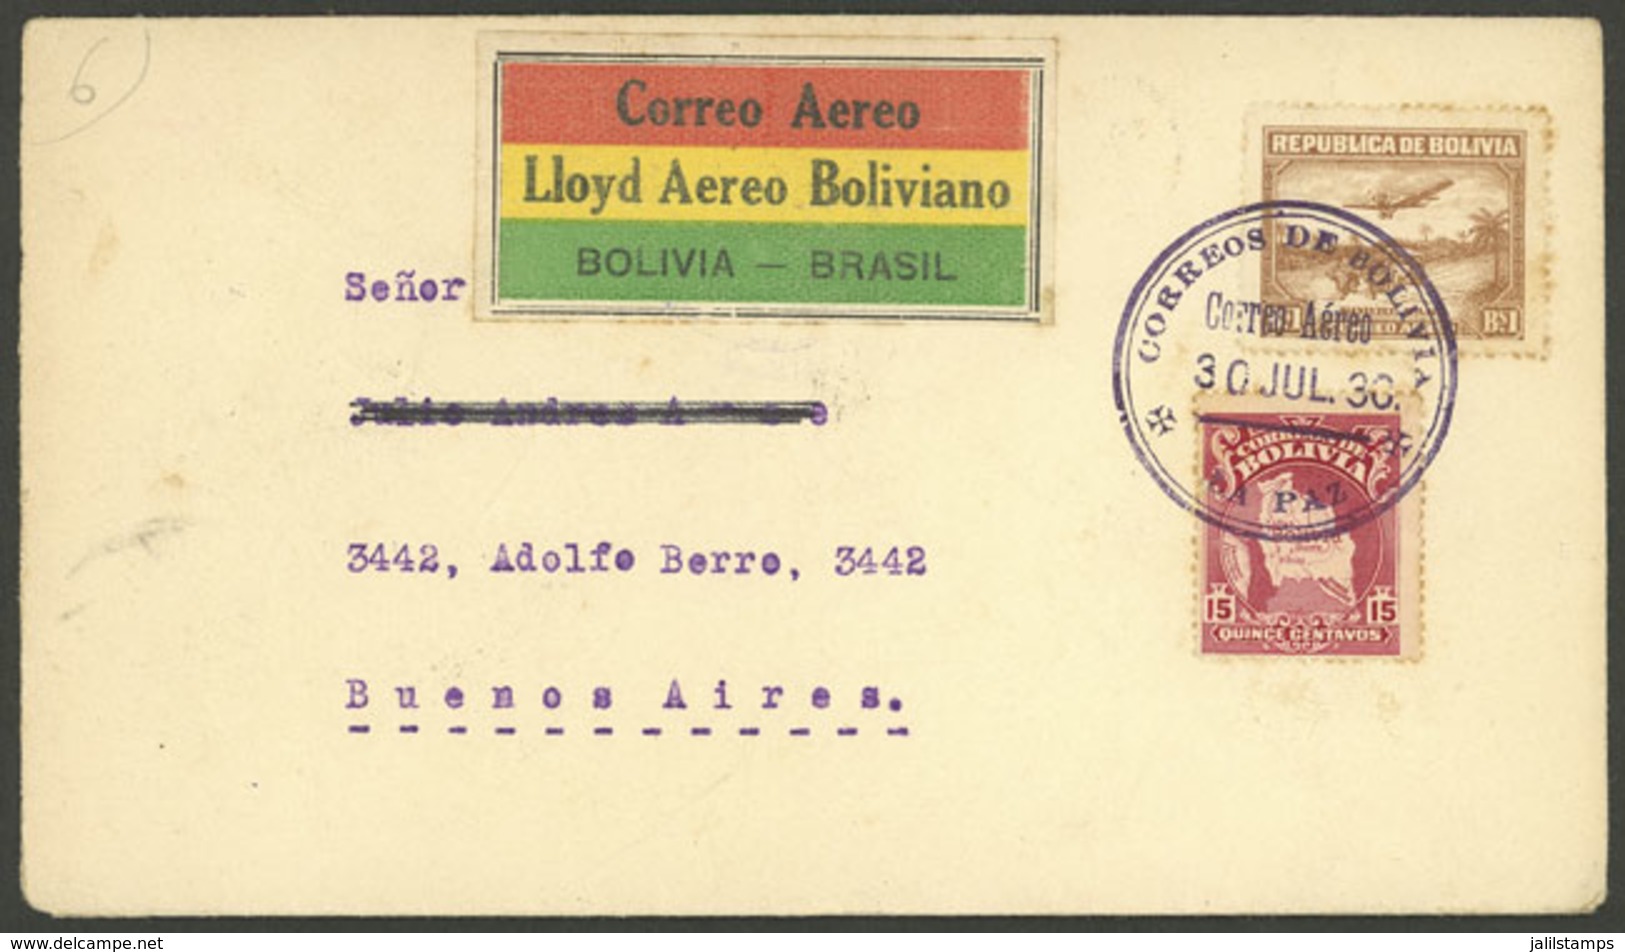 BOLIVIA: 30/AU/1930 La Paz - Buenos Aires, First Airmail Cover Of Lloyd Aéreo Boliviano, Cover With Special Label Of The - Bolivien